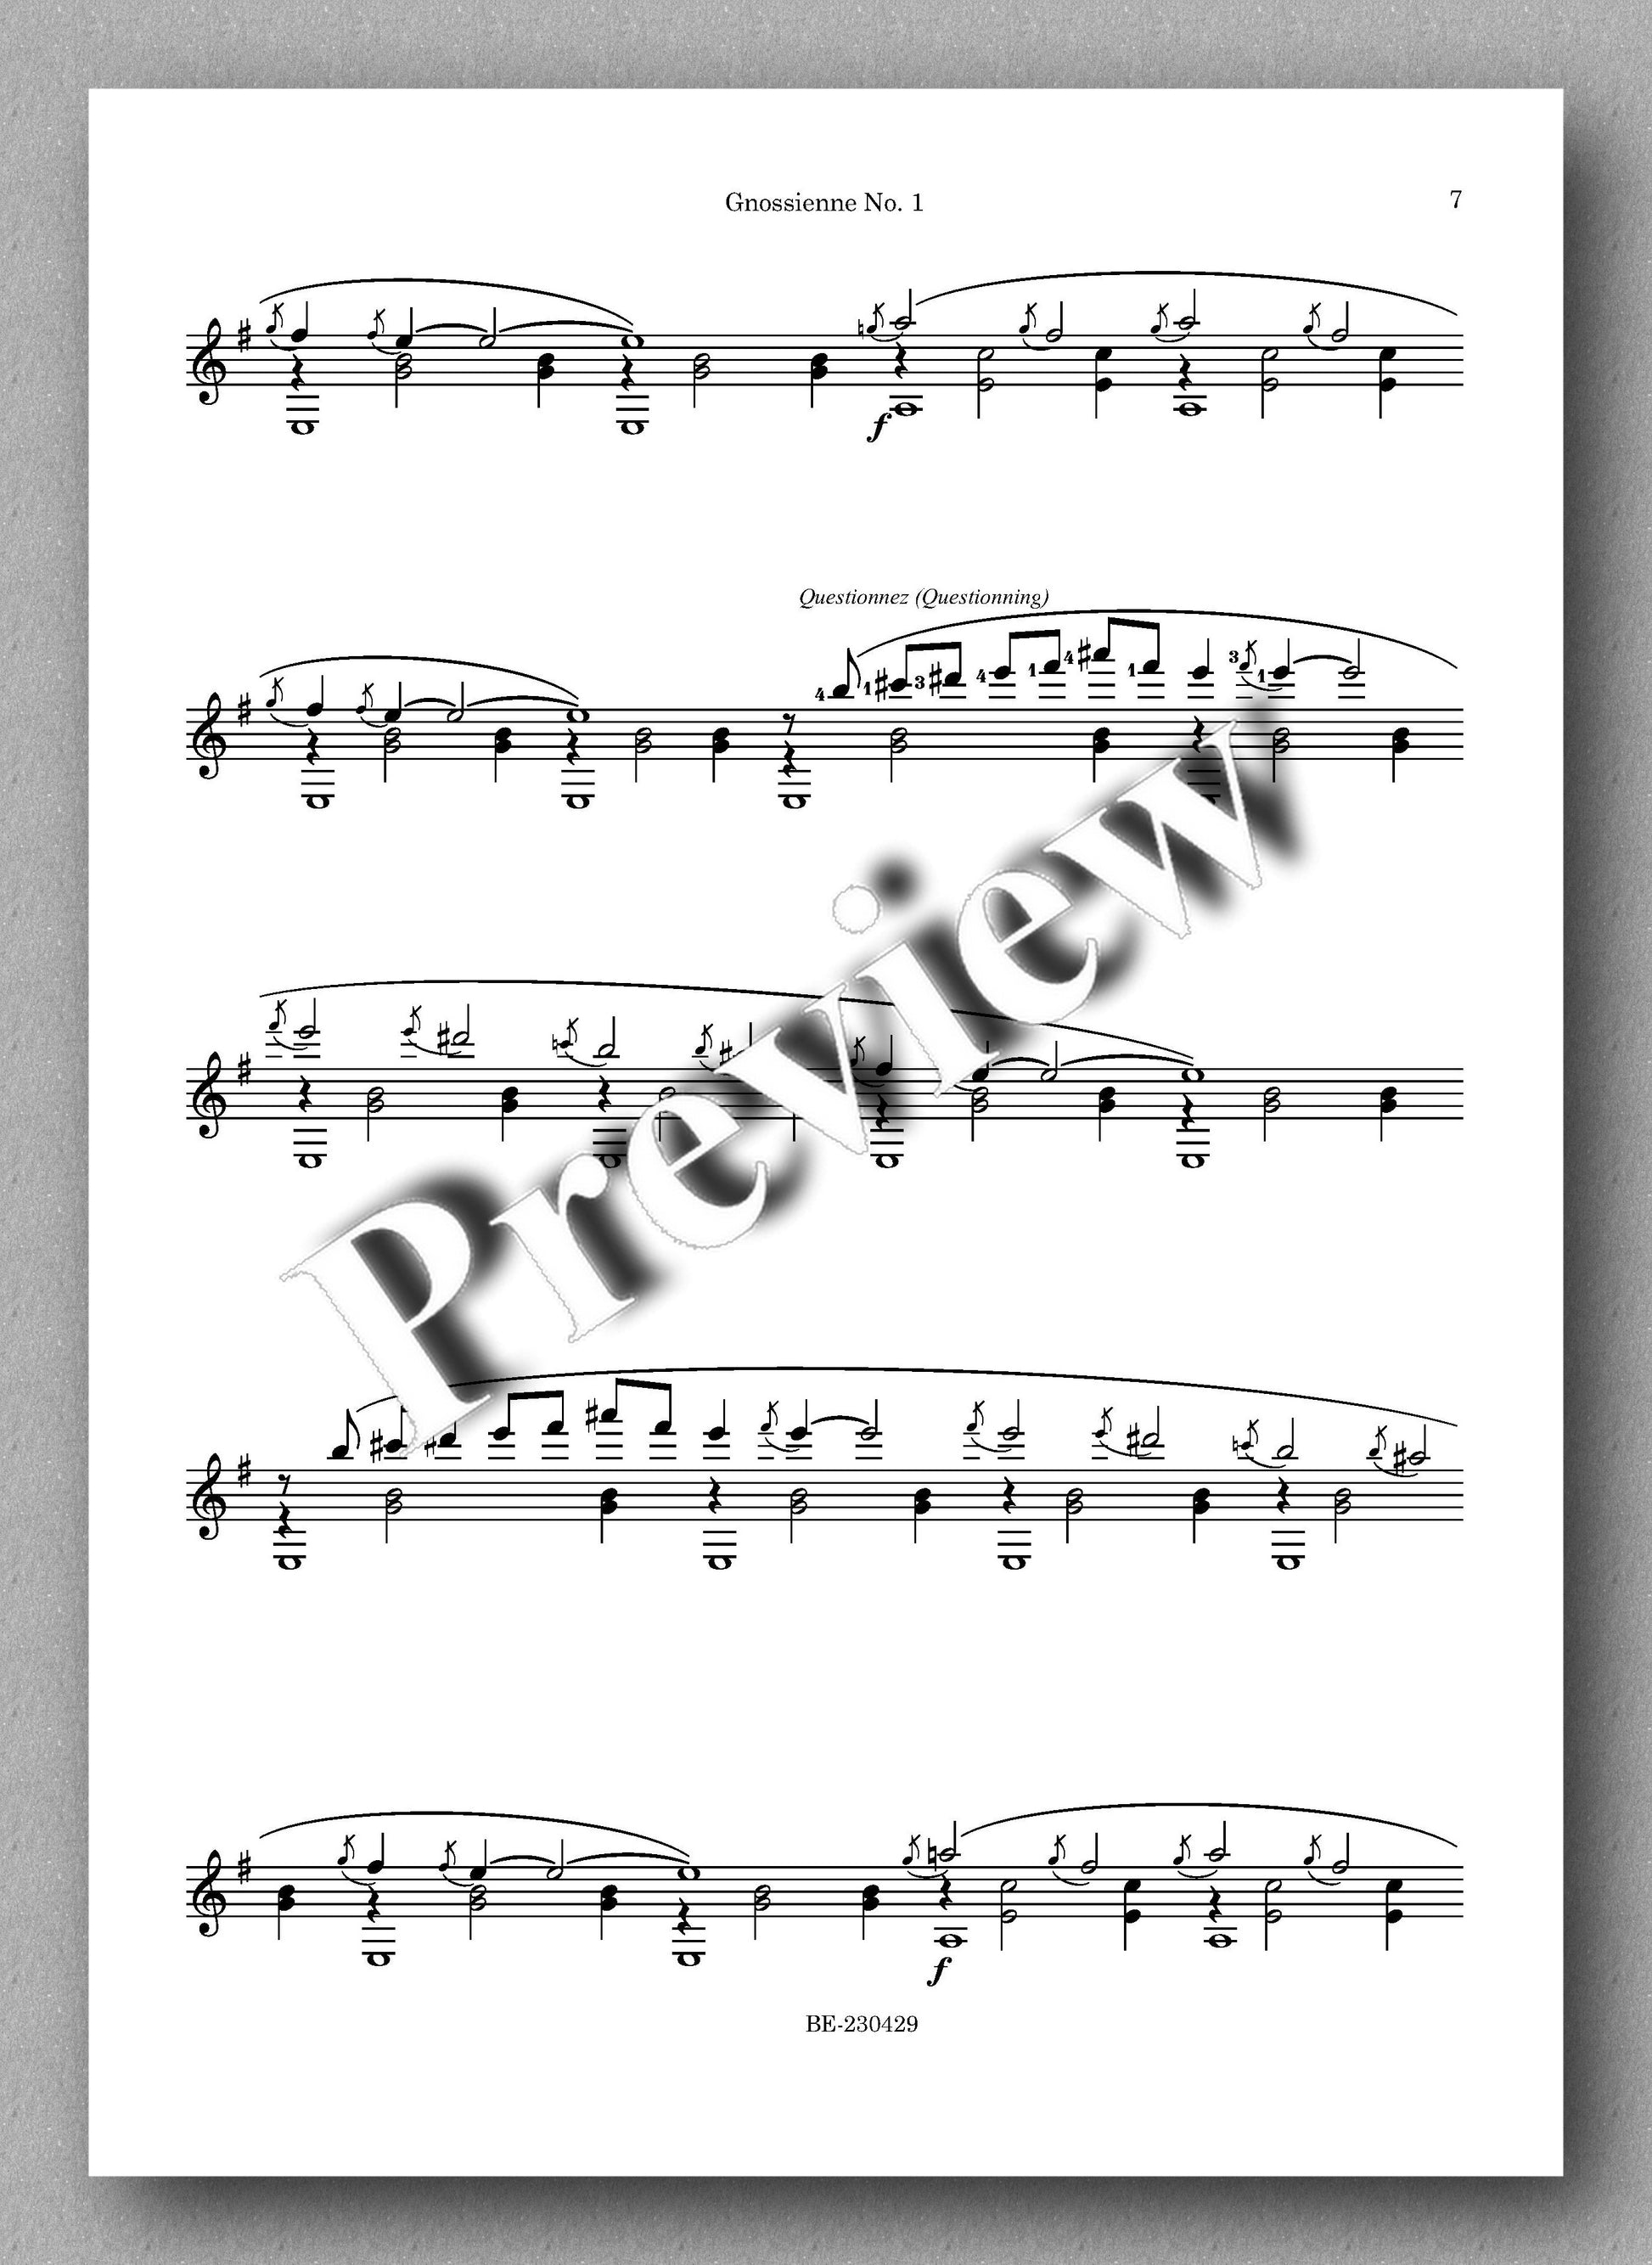 Eric Satie, Gnossienne No. 1 - preview of the music score 2